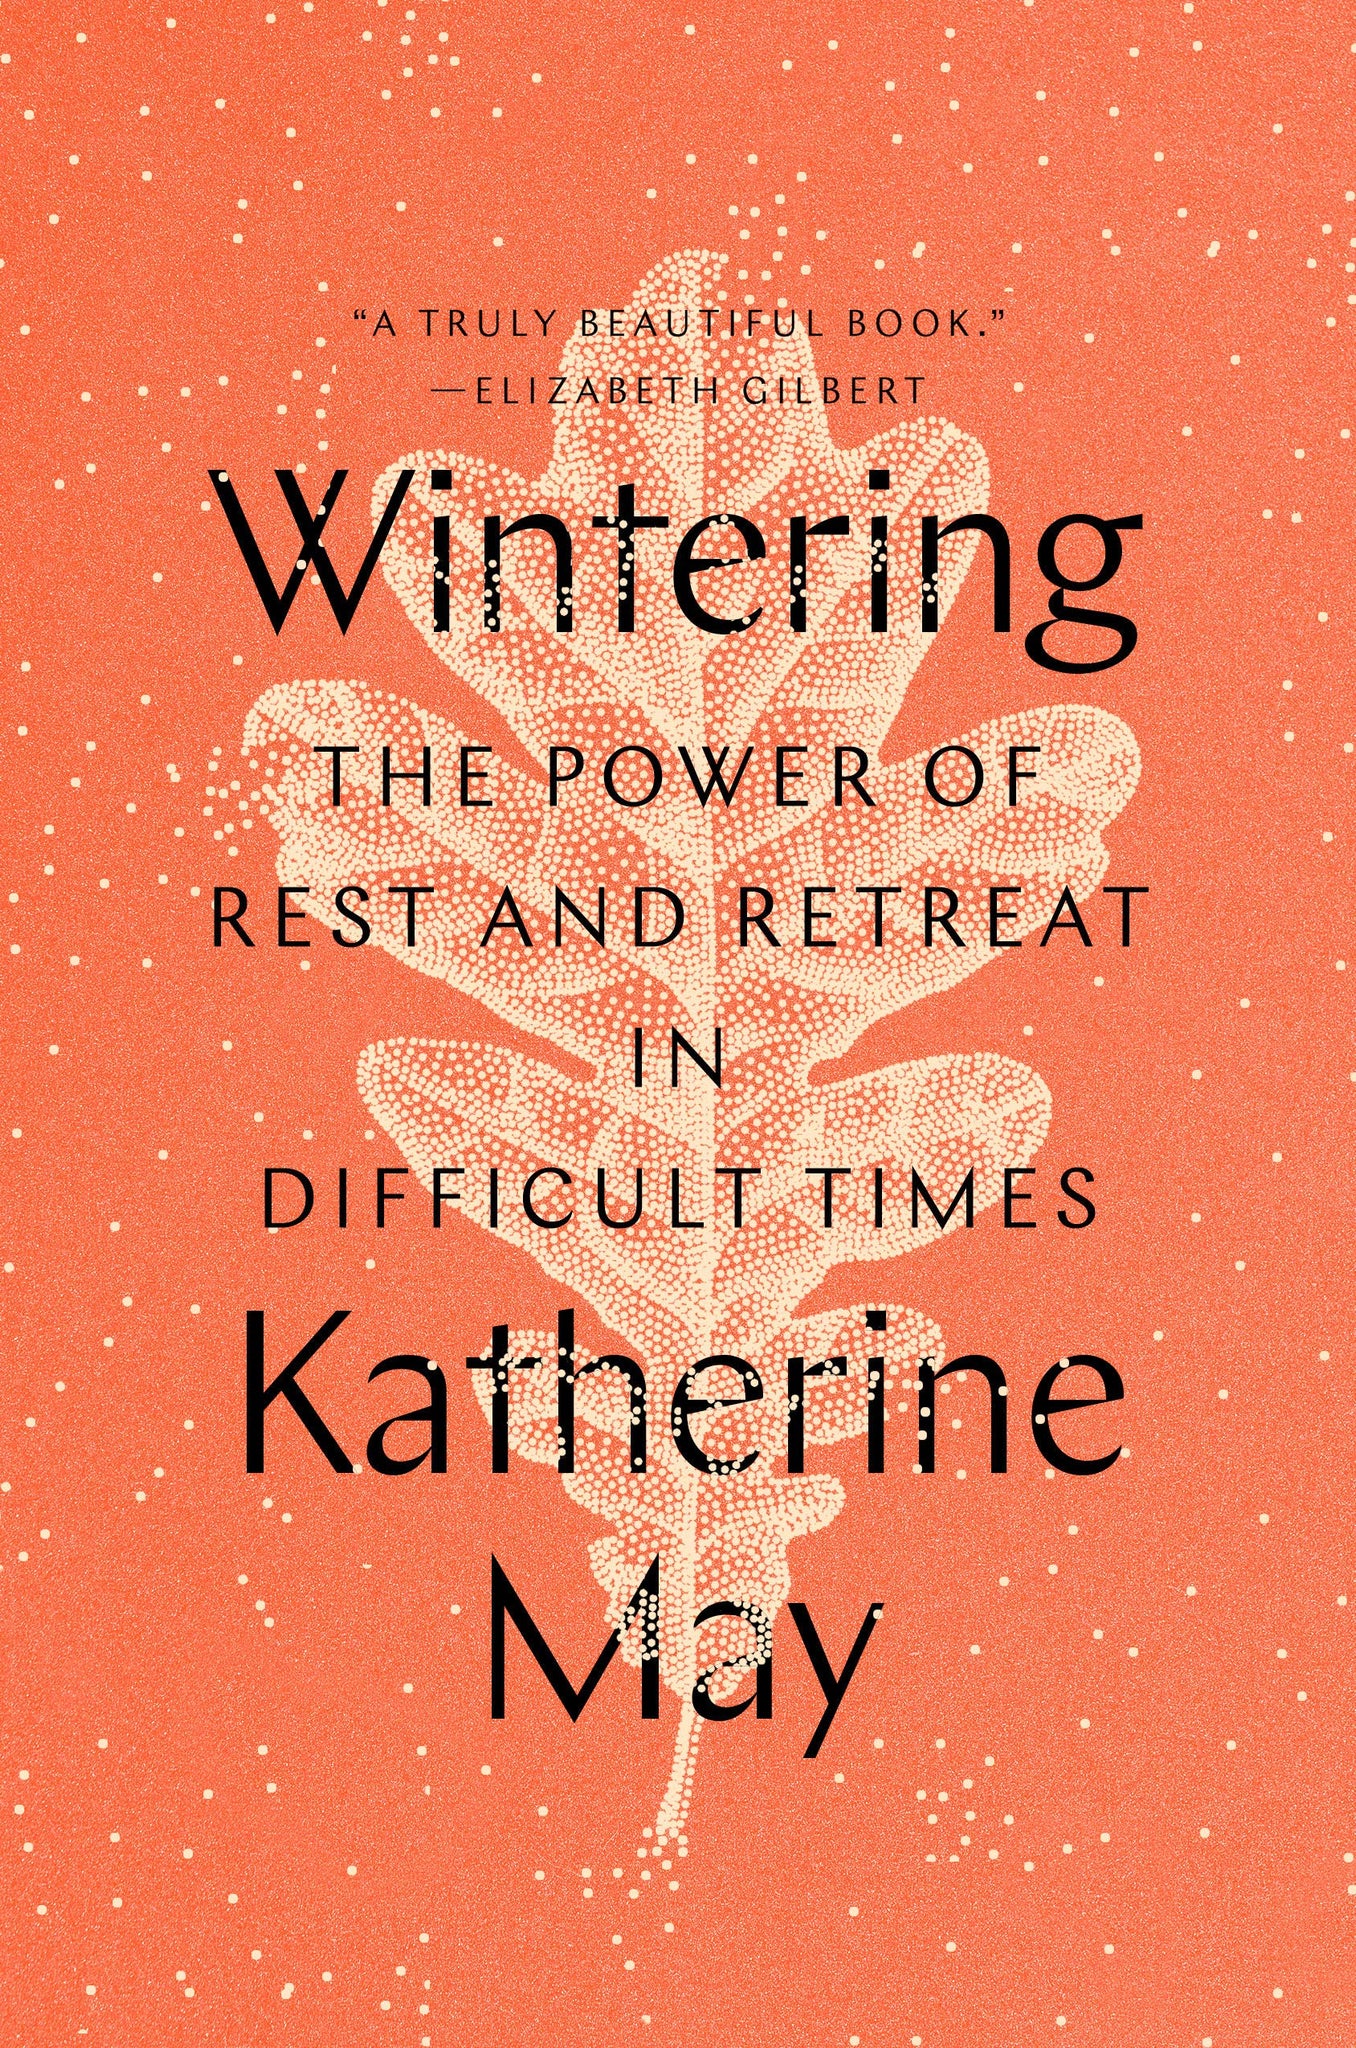 Wintering: The Power To Rest & Retreat In Difficult Times